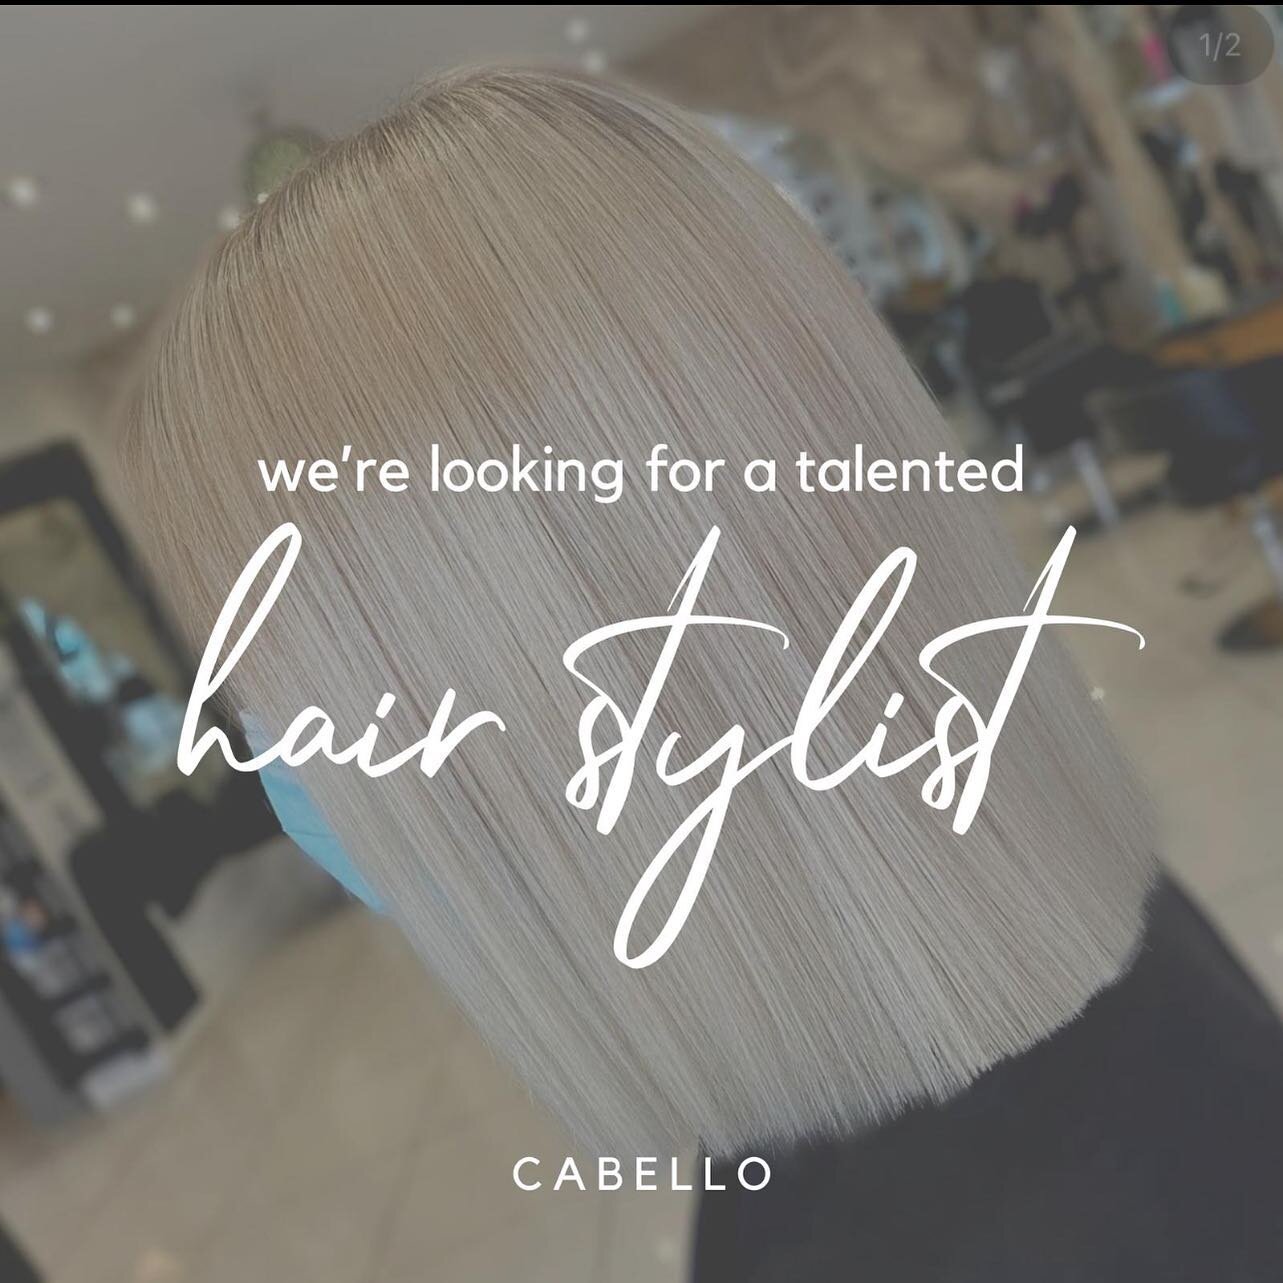 We're still on the lookout for a talented, creative hair stylist... 💇🏼&zwj;♀️💇🏽💇🏾&zwj;♀️💇🏻&zwj;♂️

💫  Is that you?? 
💫 Or do you know someone who would fit in great at Cabello?

Let us know or ask them to get in touch to hear more about thi